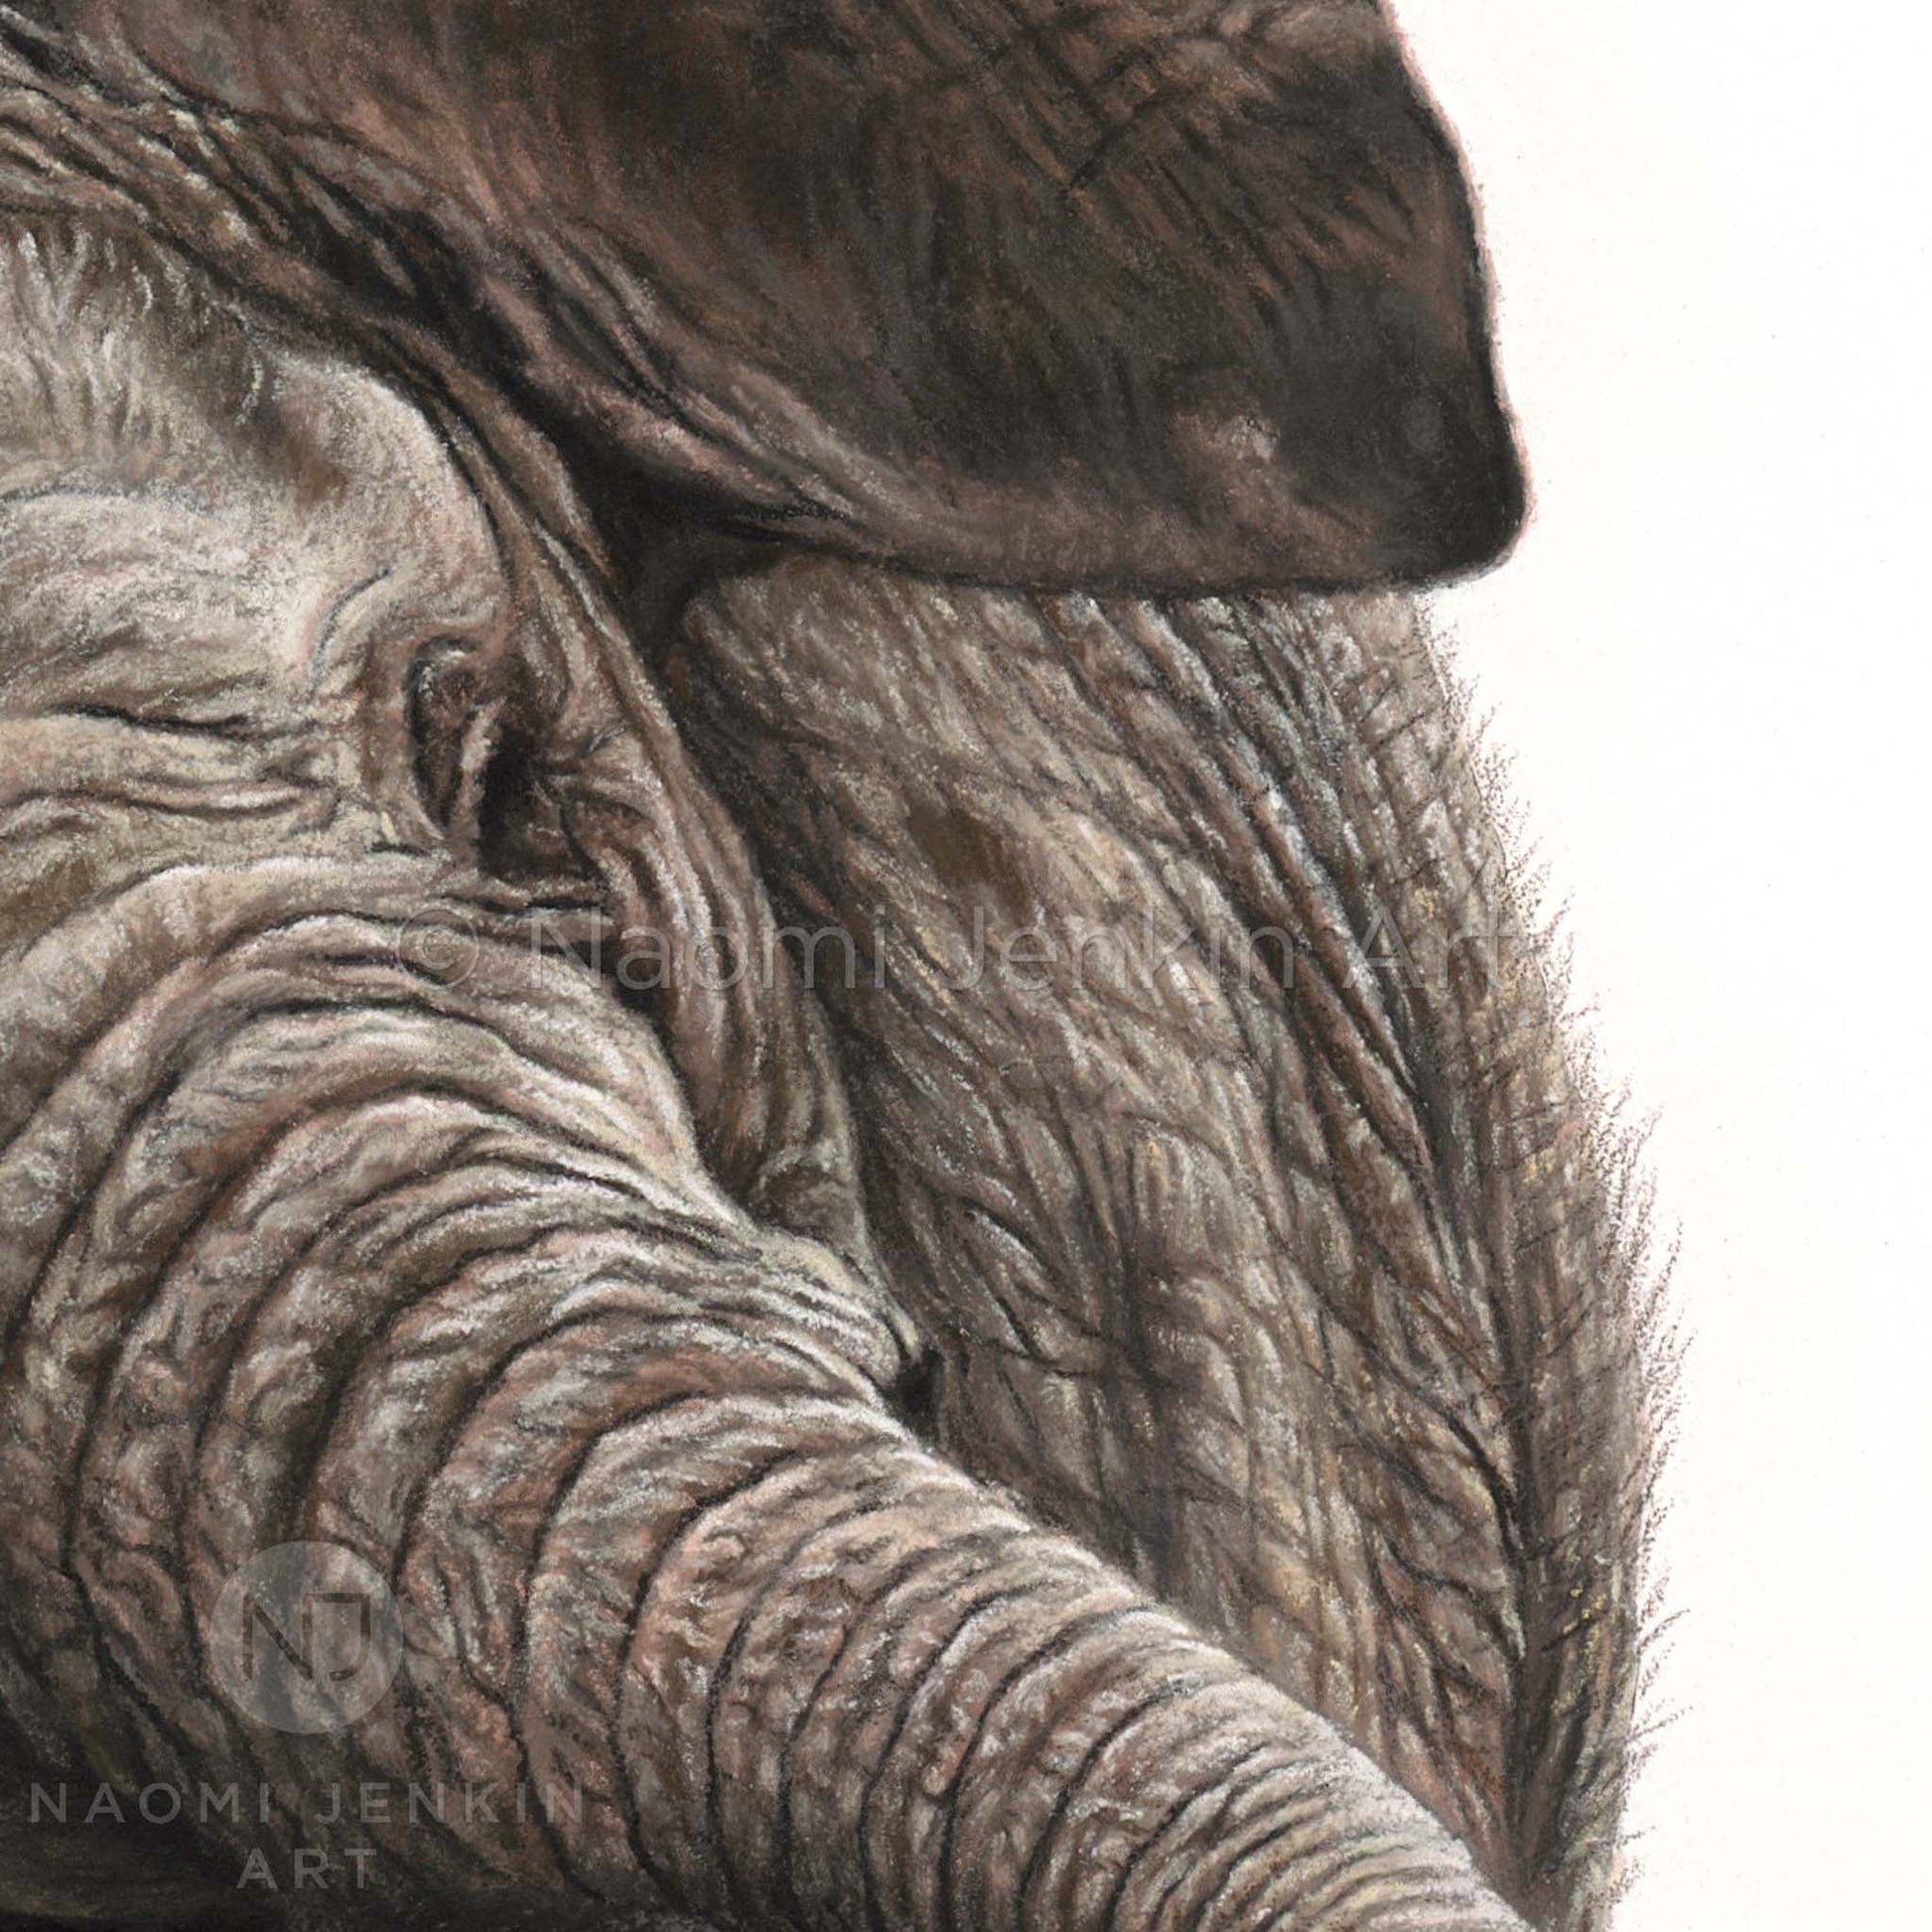 Close up elephant face and trunk from the 'Shake It Off' original painting by Naomi Jenkin